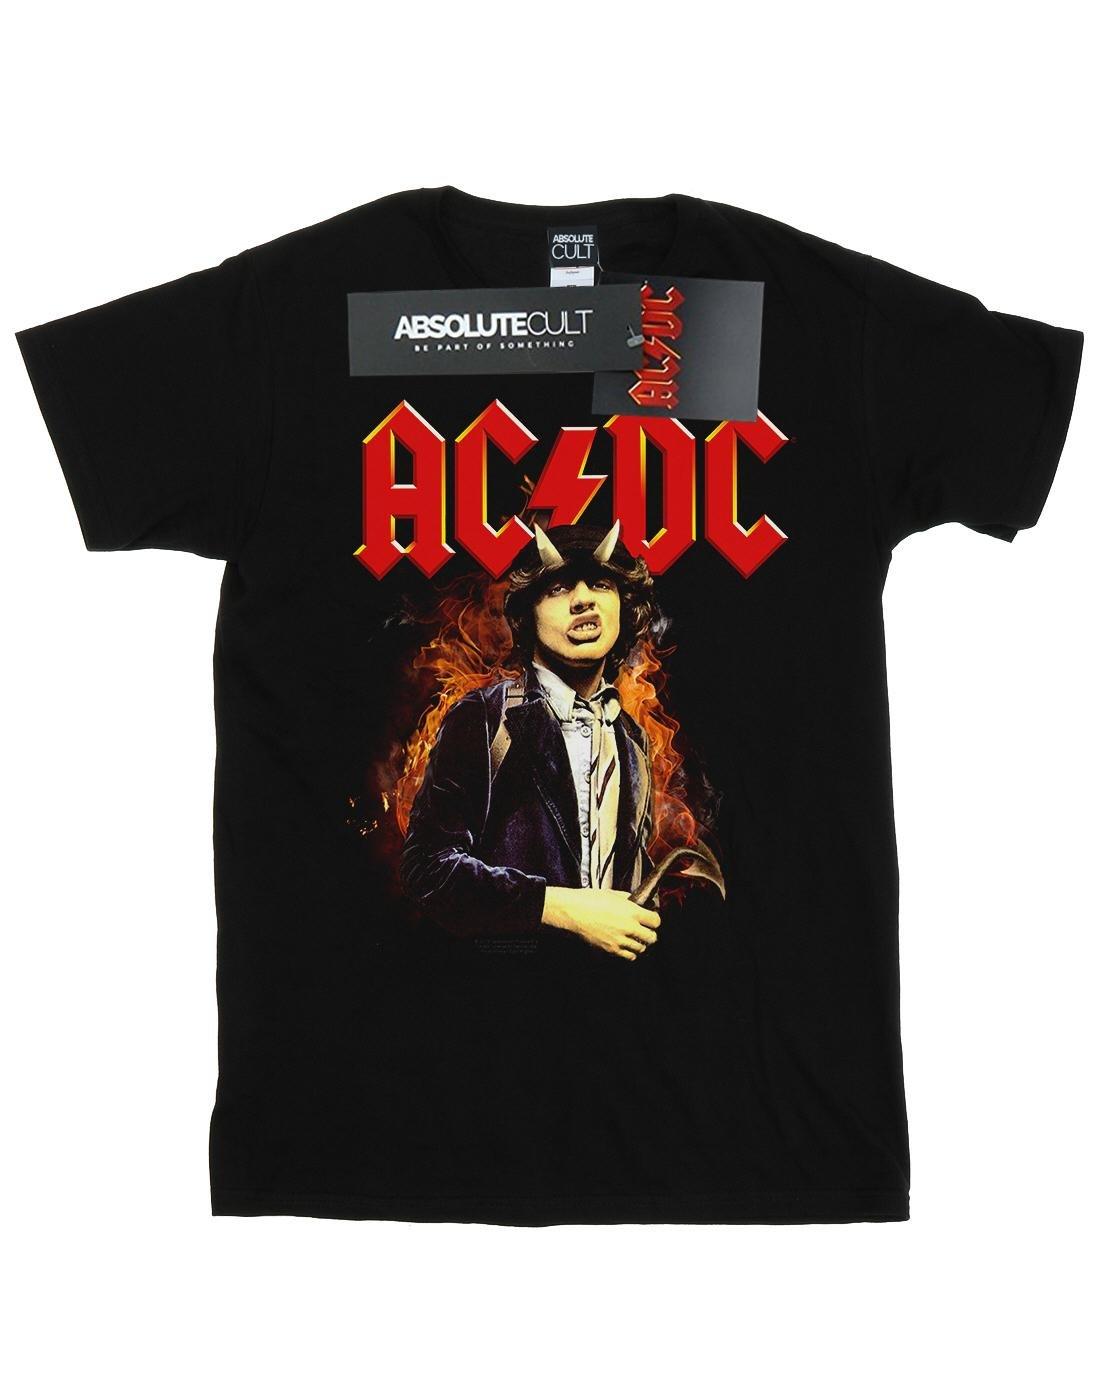 AC/DC  ACDC Angus Highway To Hell TShirt 